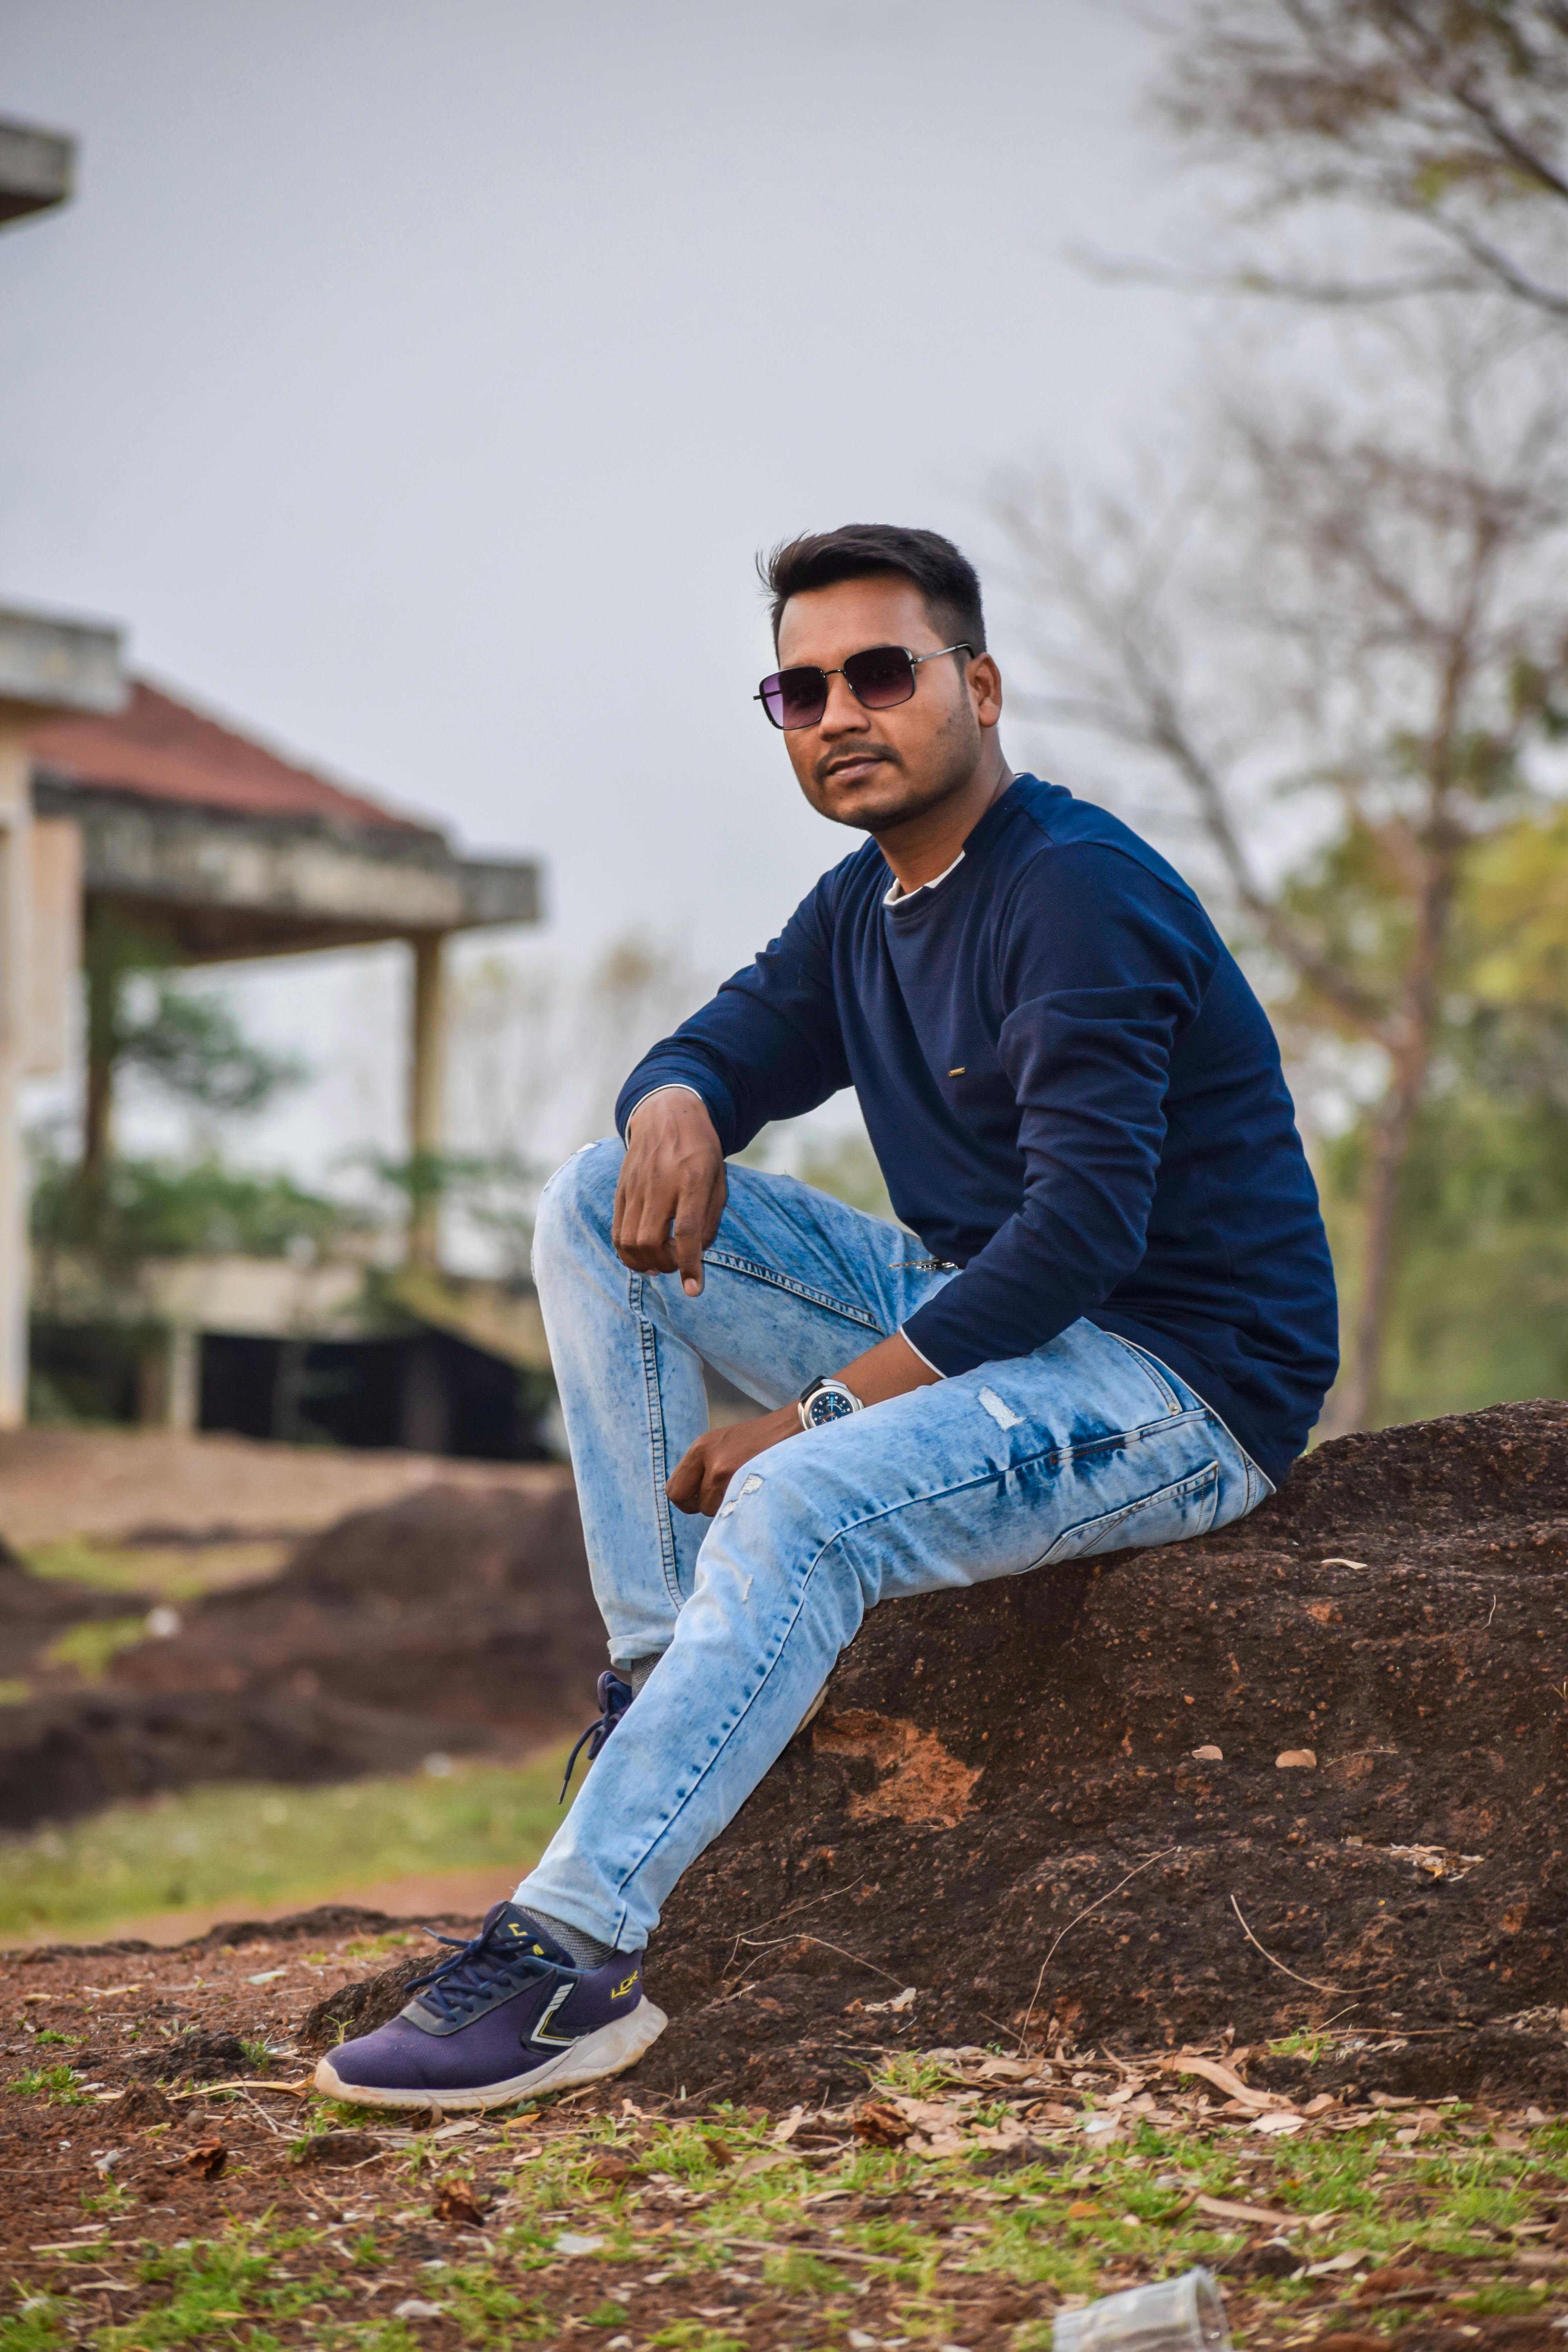 New Latest Stylish Outdoor Photoshoot Pose For Men  Best New Photography  Pose For Boys live  YouTube